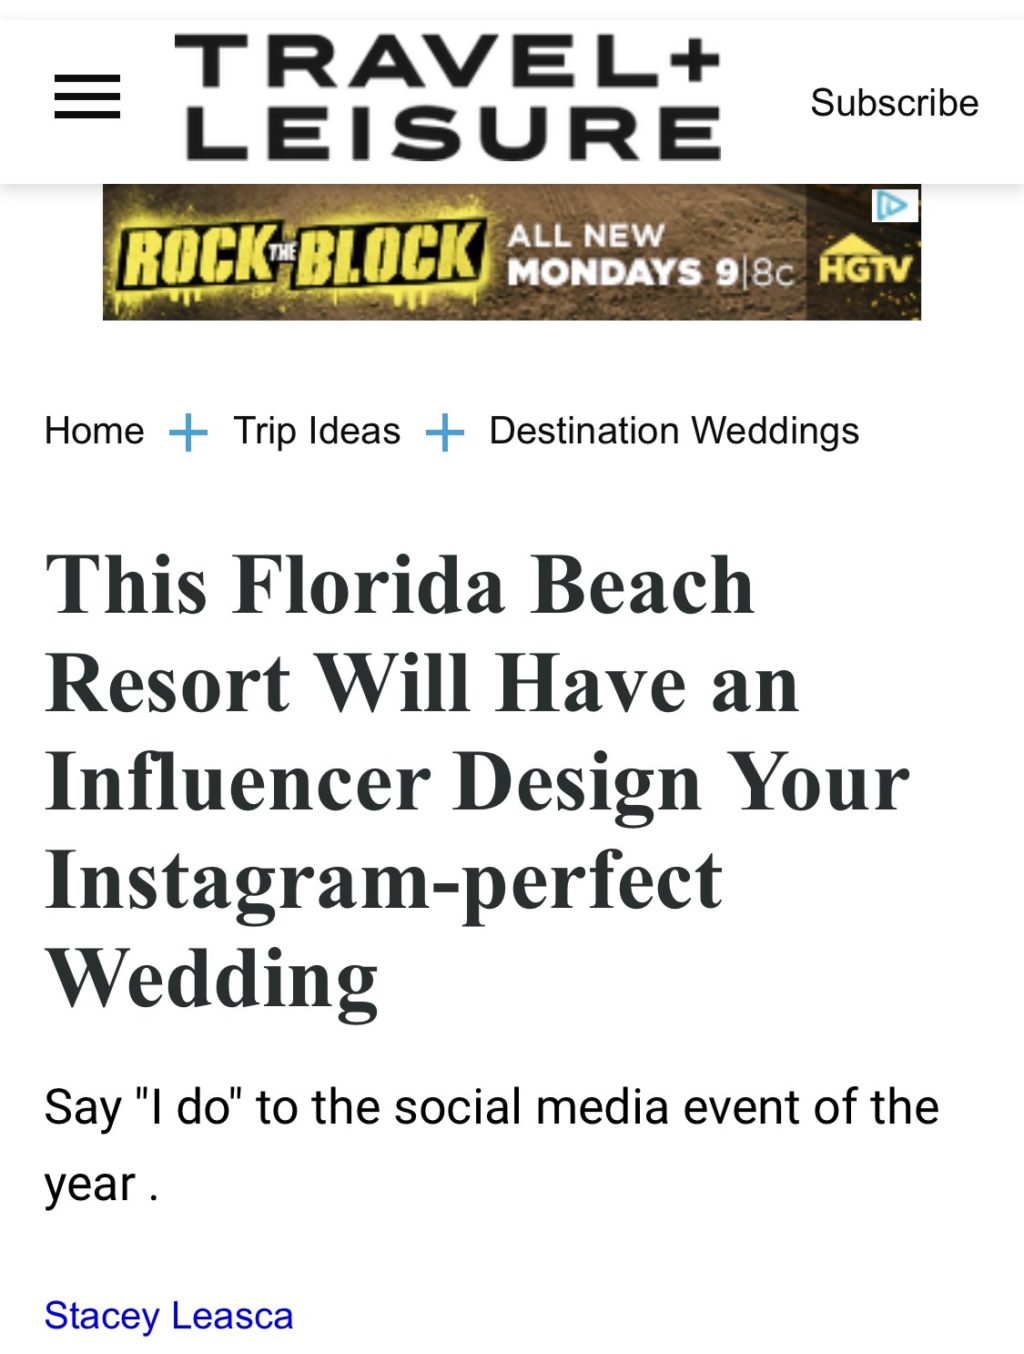 St. Pete Beach Wedding Venue Bellwether Beach Resort Styled with Love Influencer Designed Wedding by Marry Me Tampa Bay Travel + Leisure Article